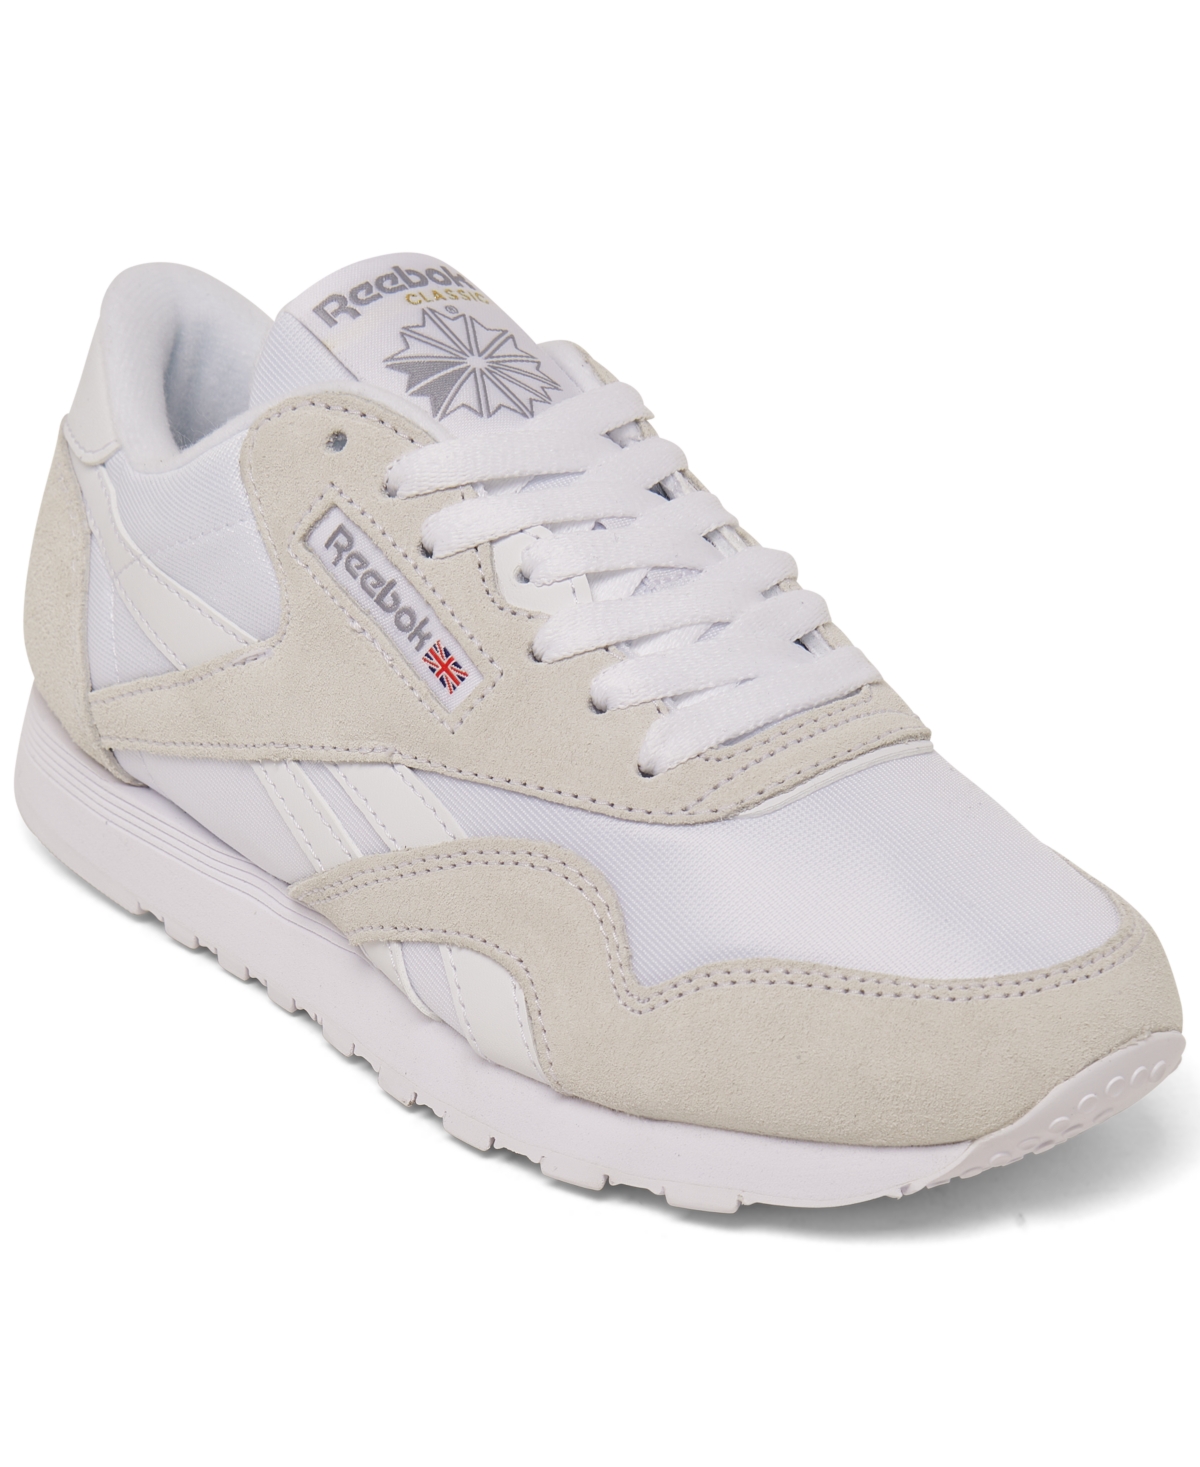 Women's Classic Nylon Casual Sneakers from Finish Line - White